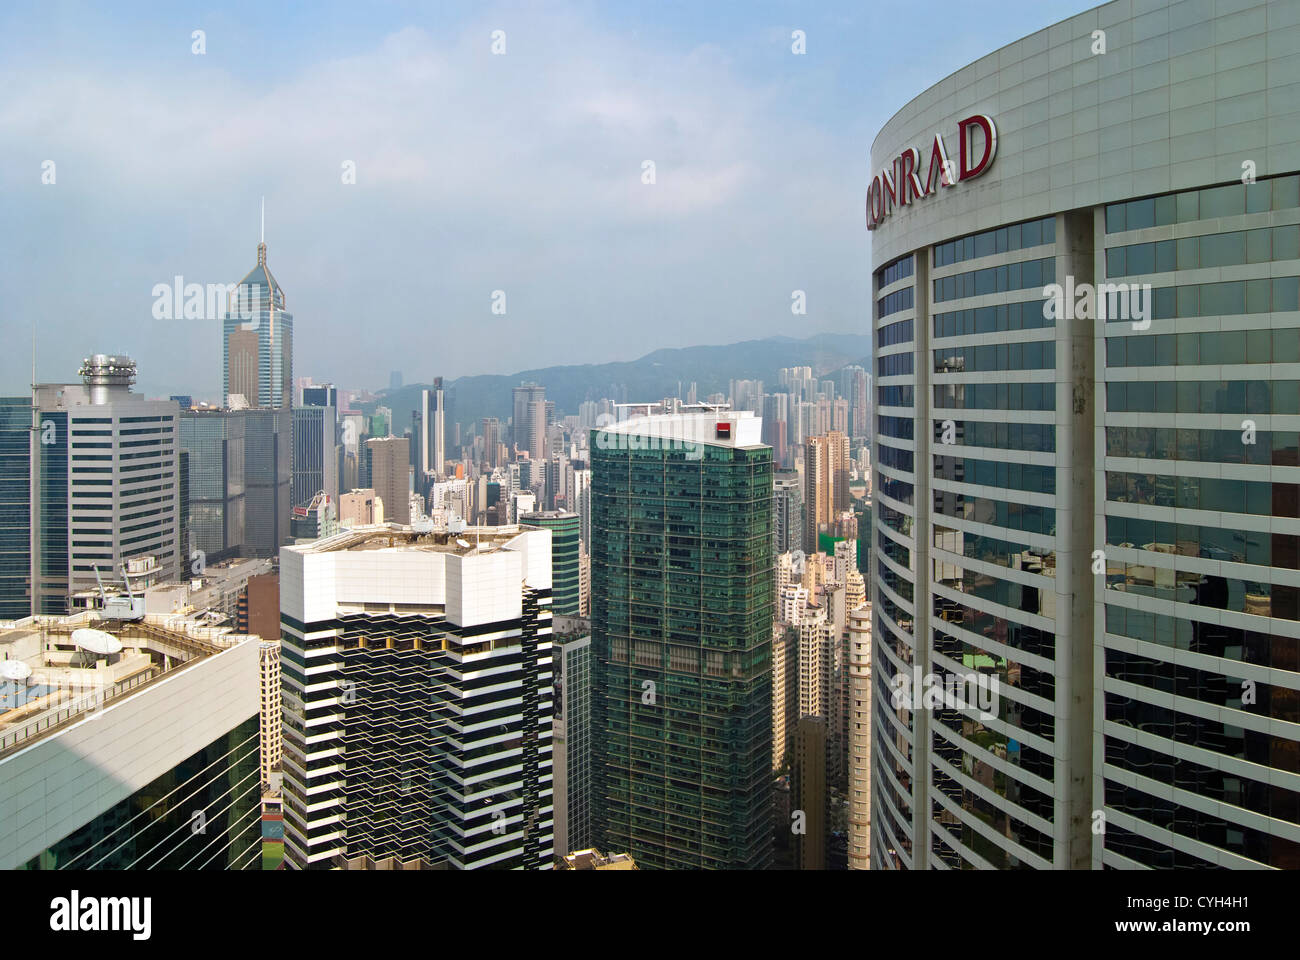 Overview of Hong Kong showing Conrad Hotel and high-rise hotel and business district Stock Photo